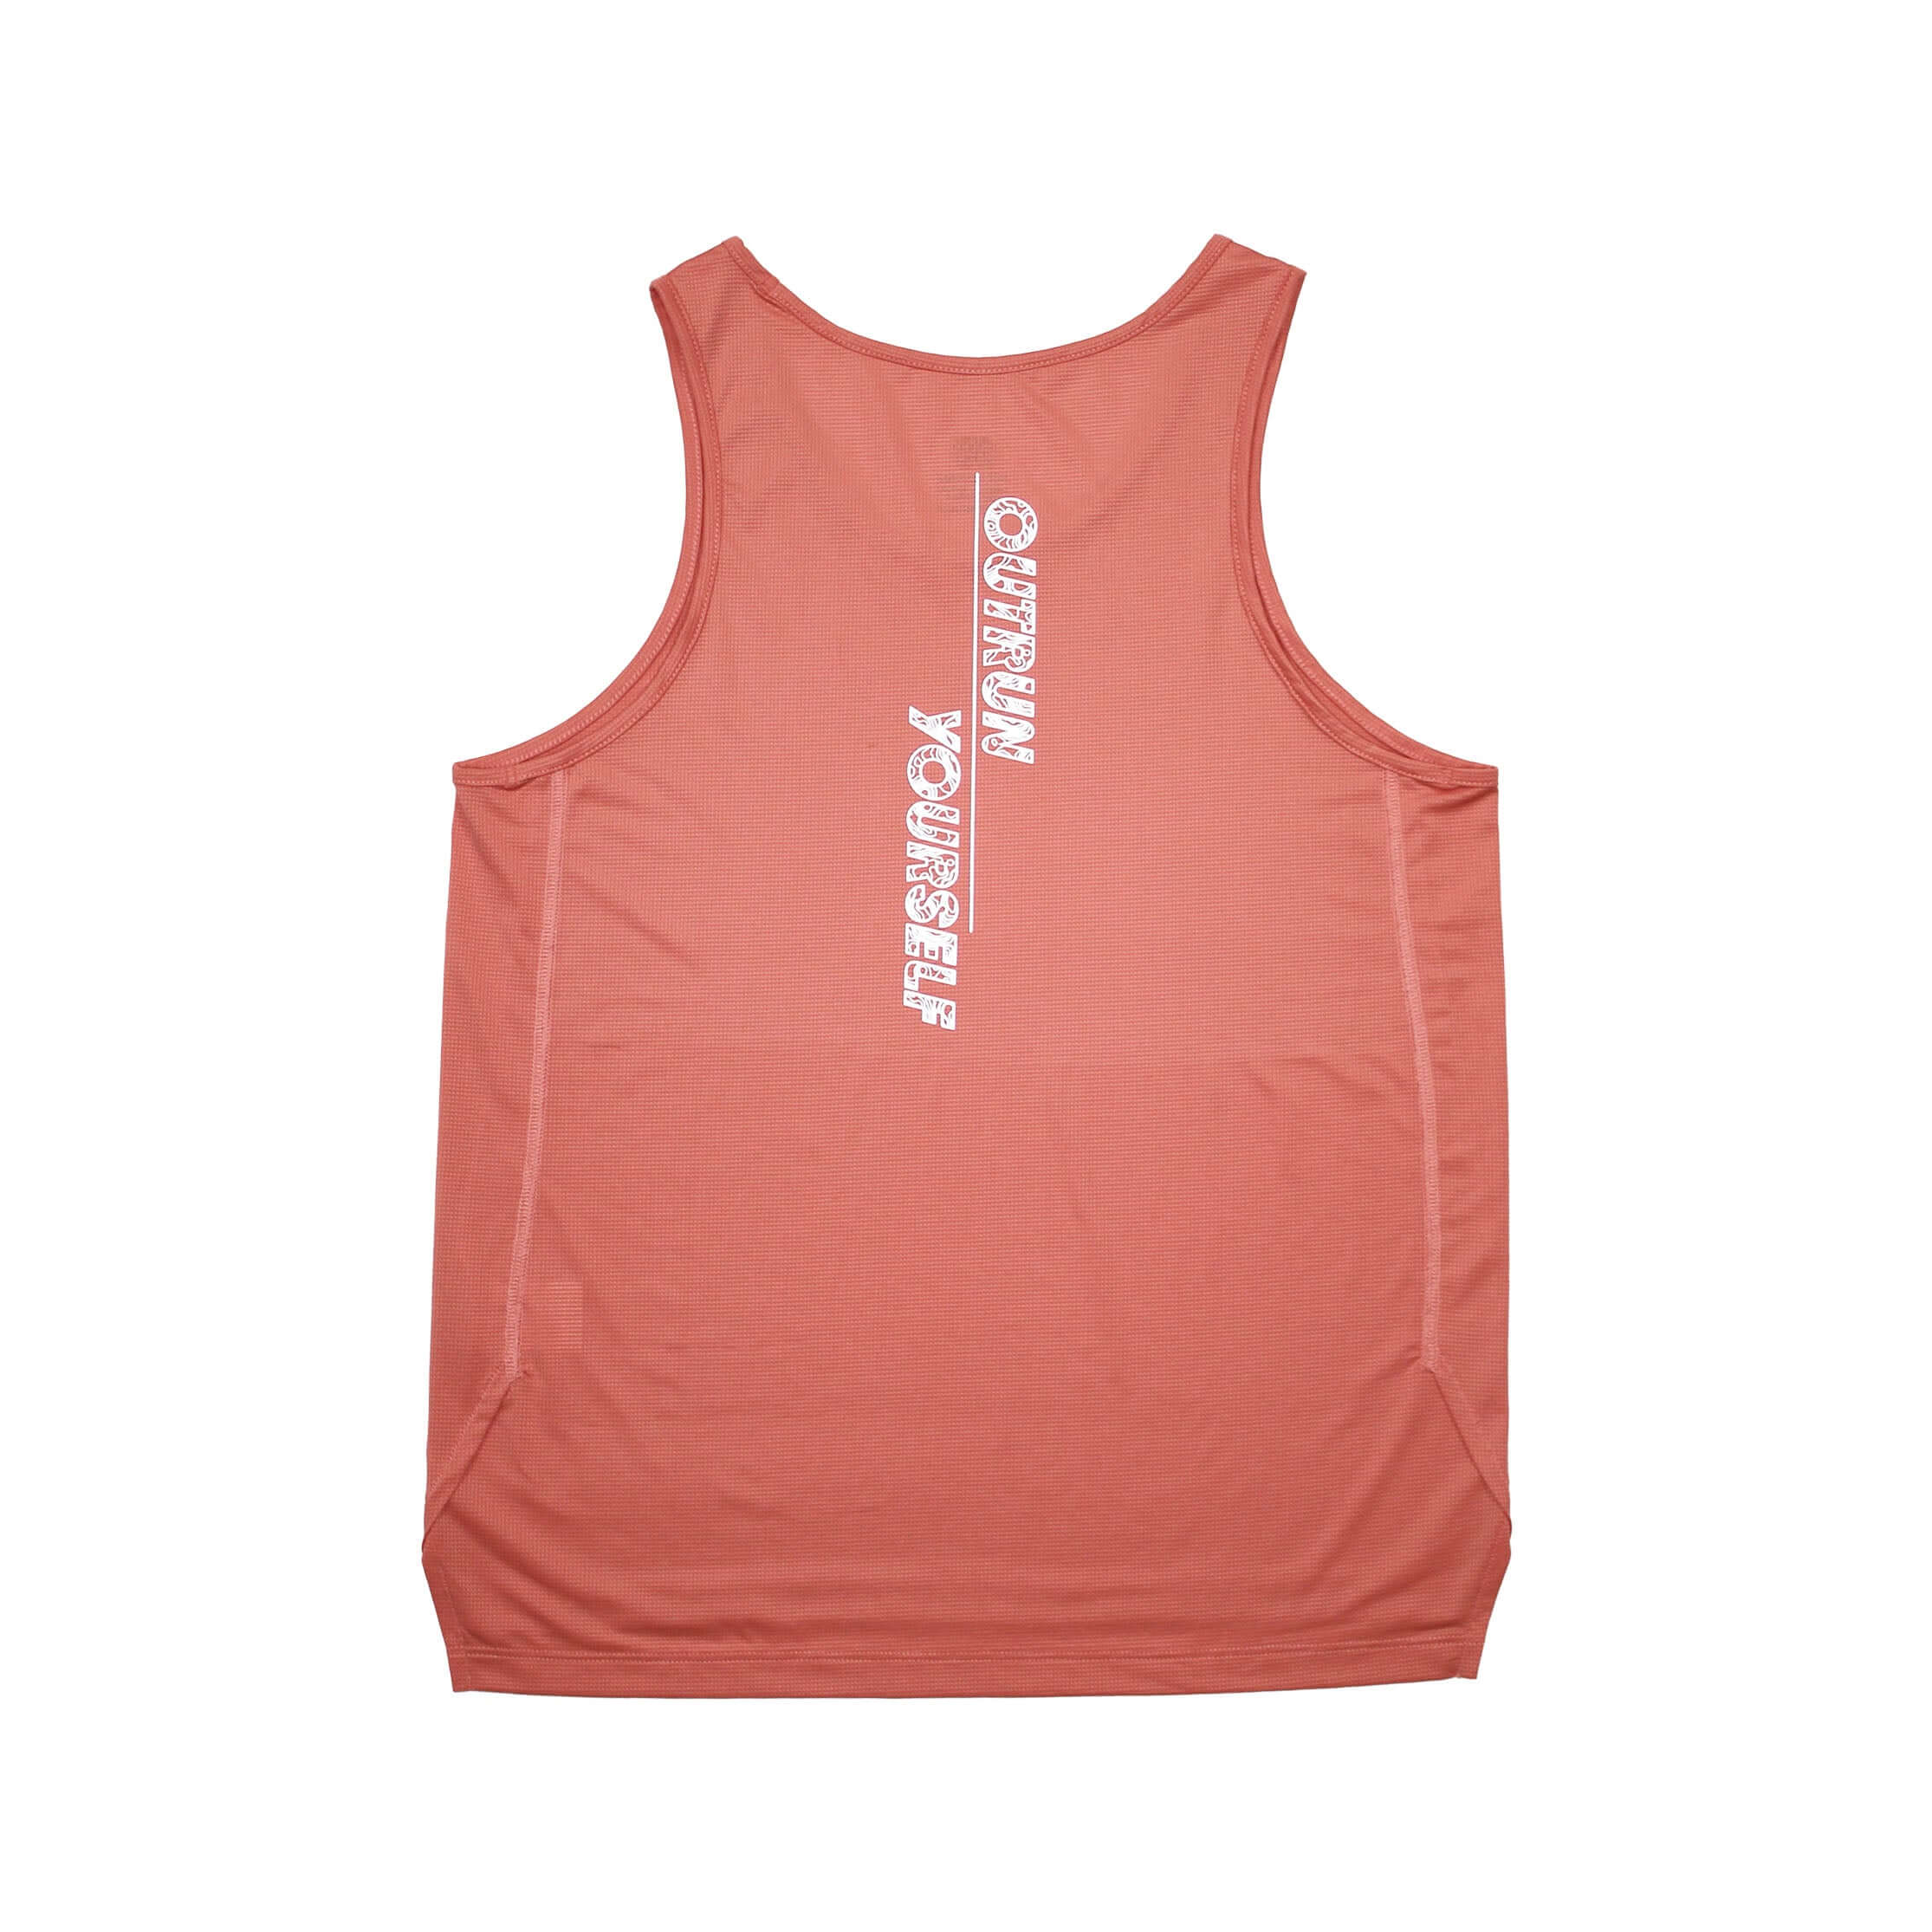 RUN WTF Running Apparel stands for high-quality and sustainable running clothing from Germany. Edgy running singlet for high-intensity training sessions and competitions. Lightweight and moisture-wicking, made from recycled polyester.